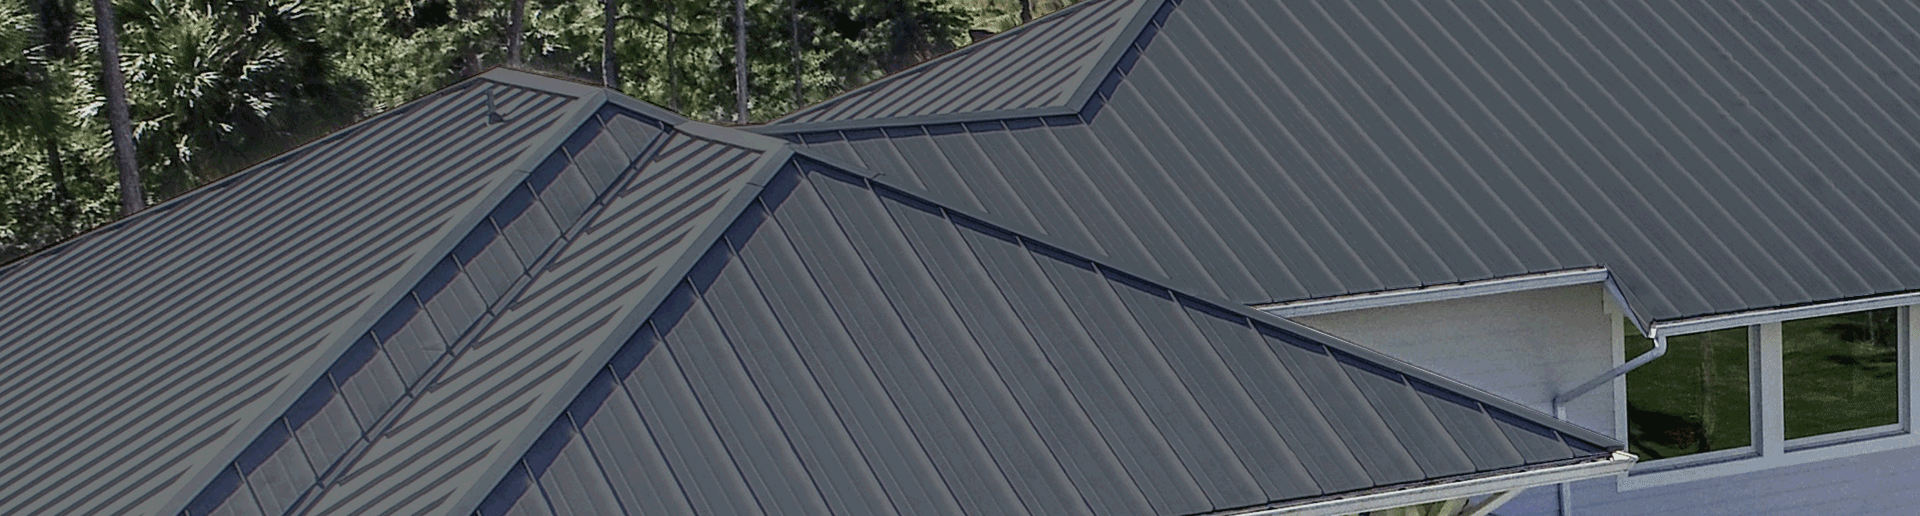 American Metal Roofing Supply Metal Roof Panels & Supplies in Florida Quality metal roofing